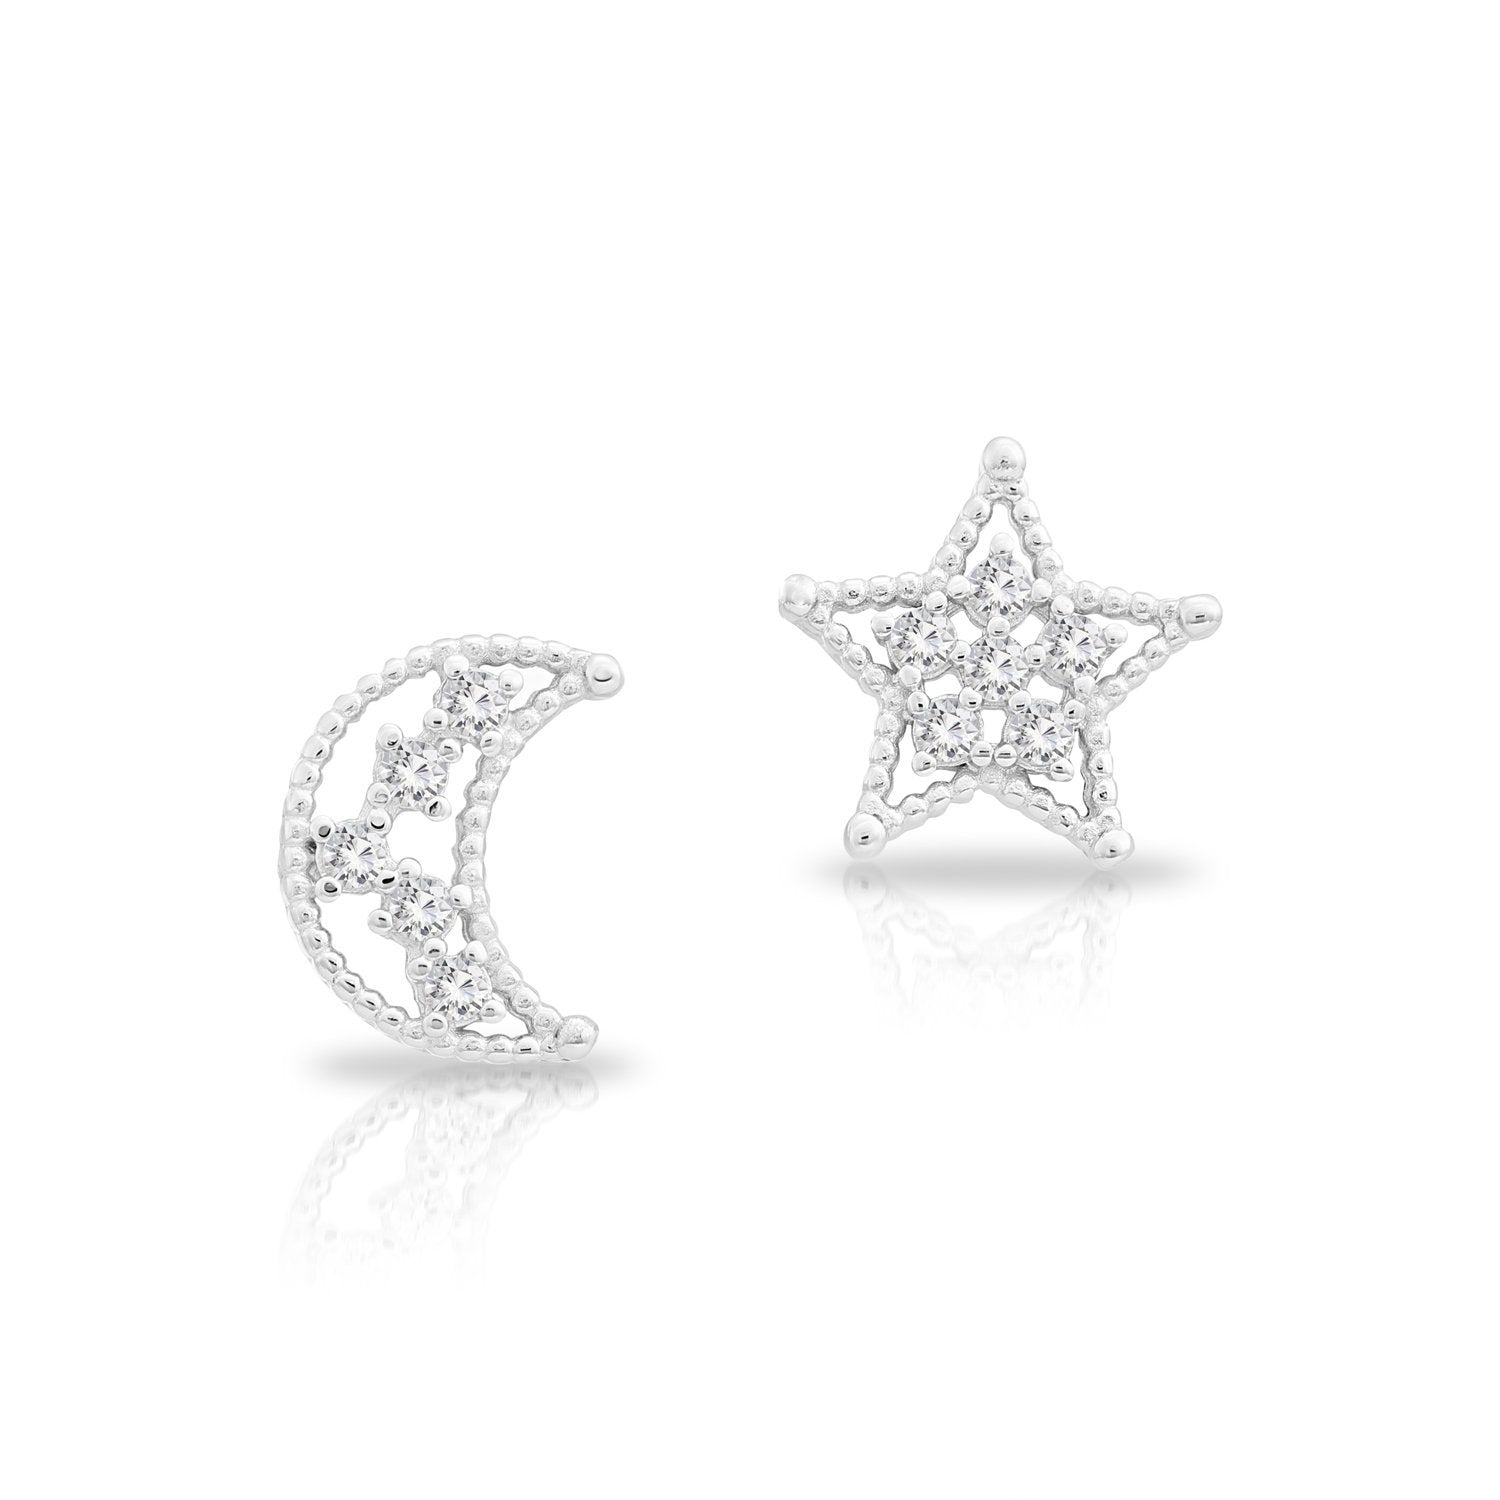 CZ Star and Moon Stud Earrings in Sterling Silver